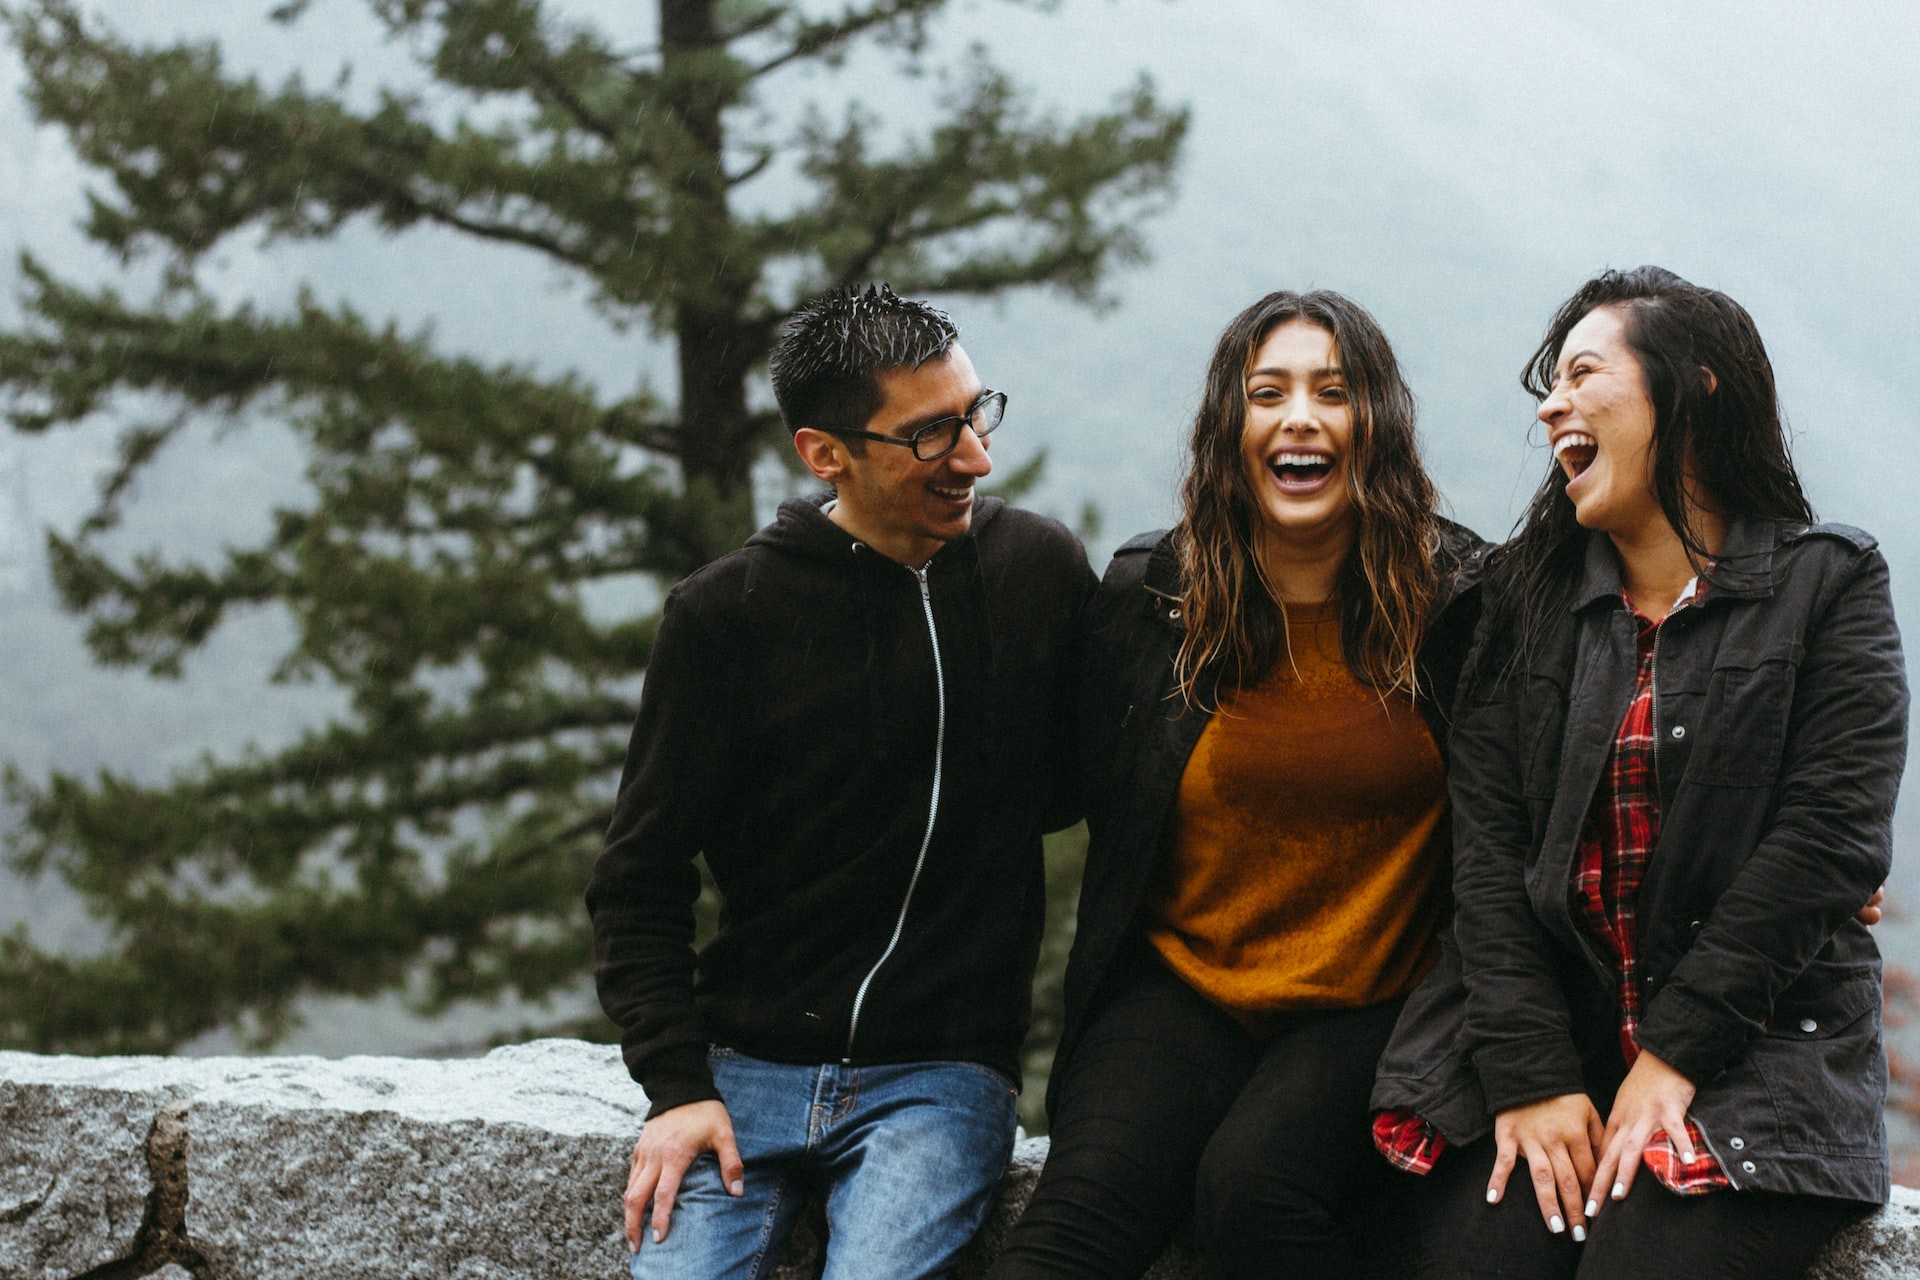 Three people outside laughing together